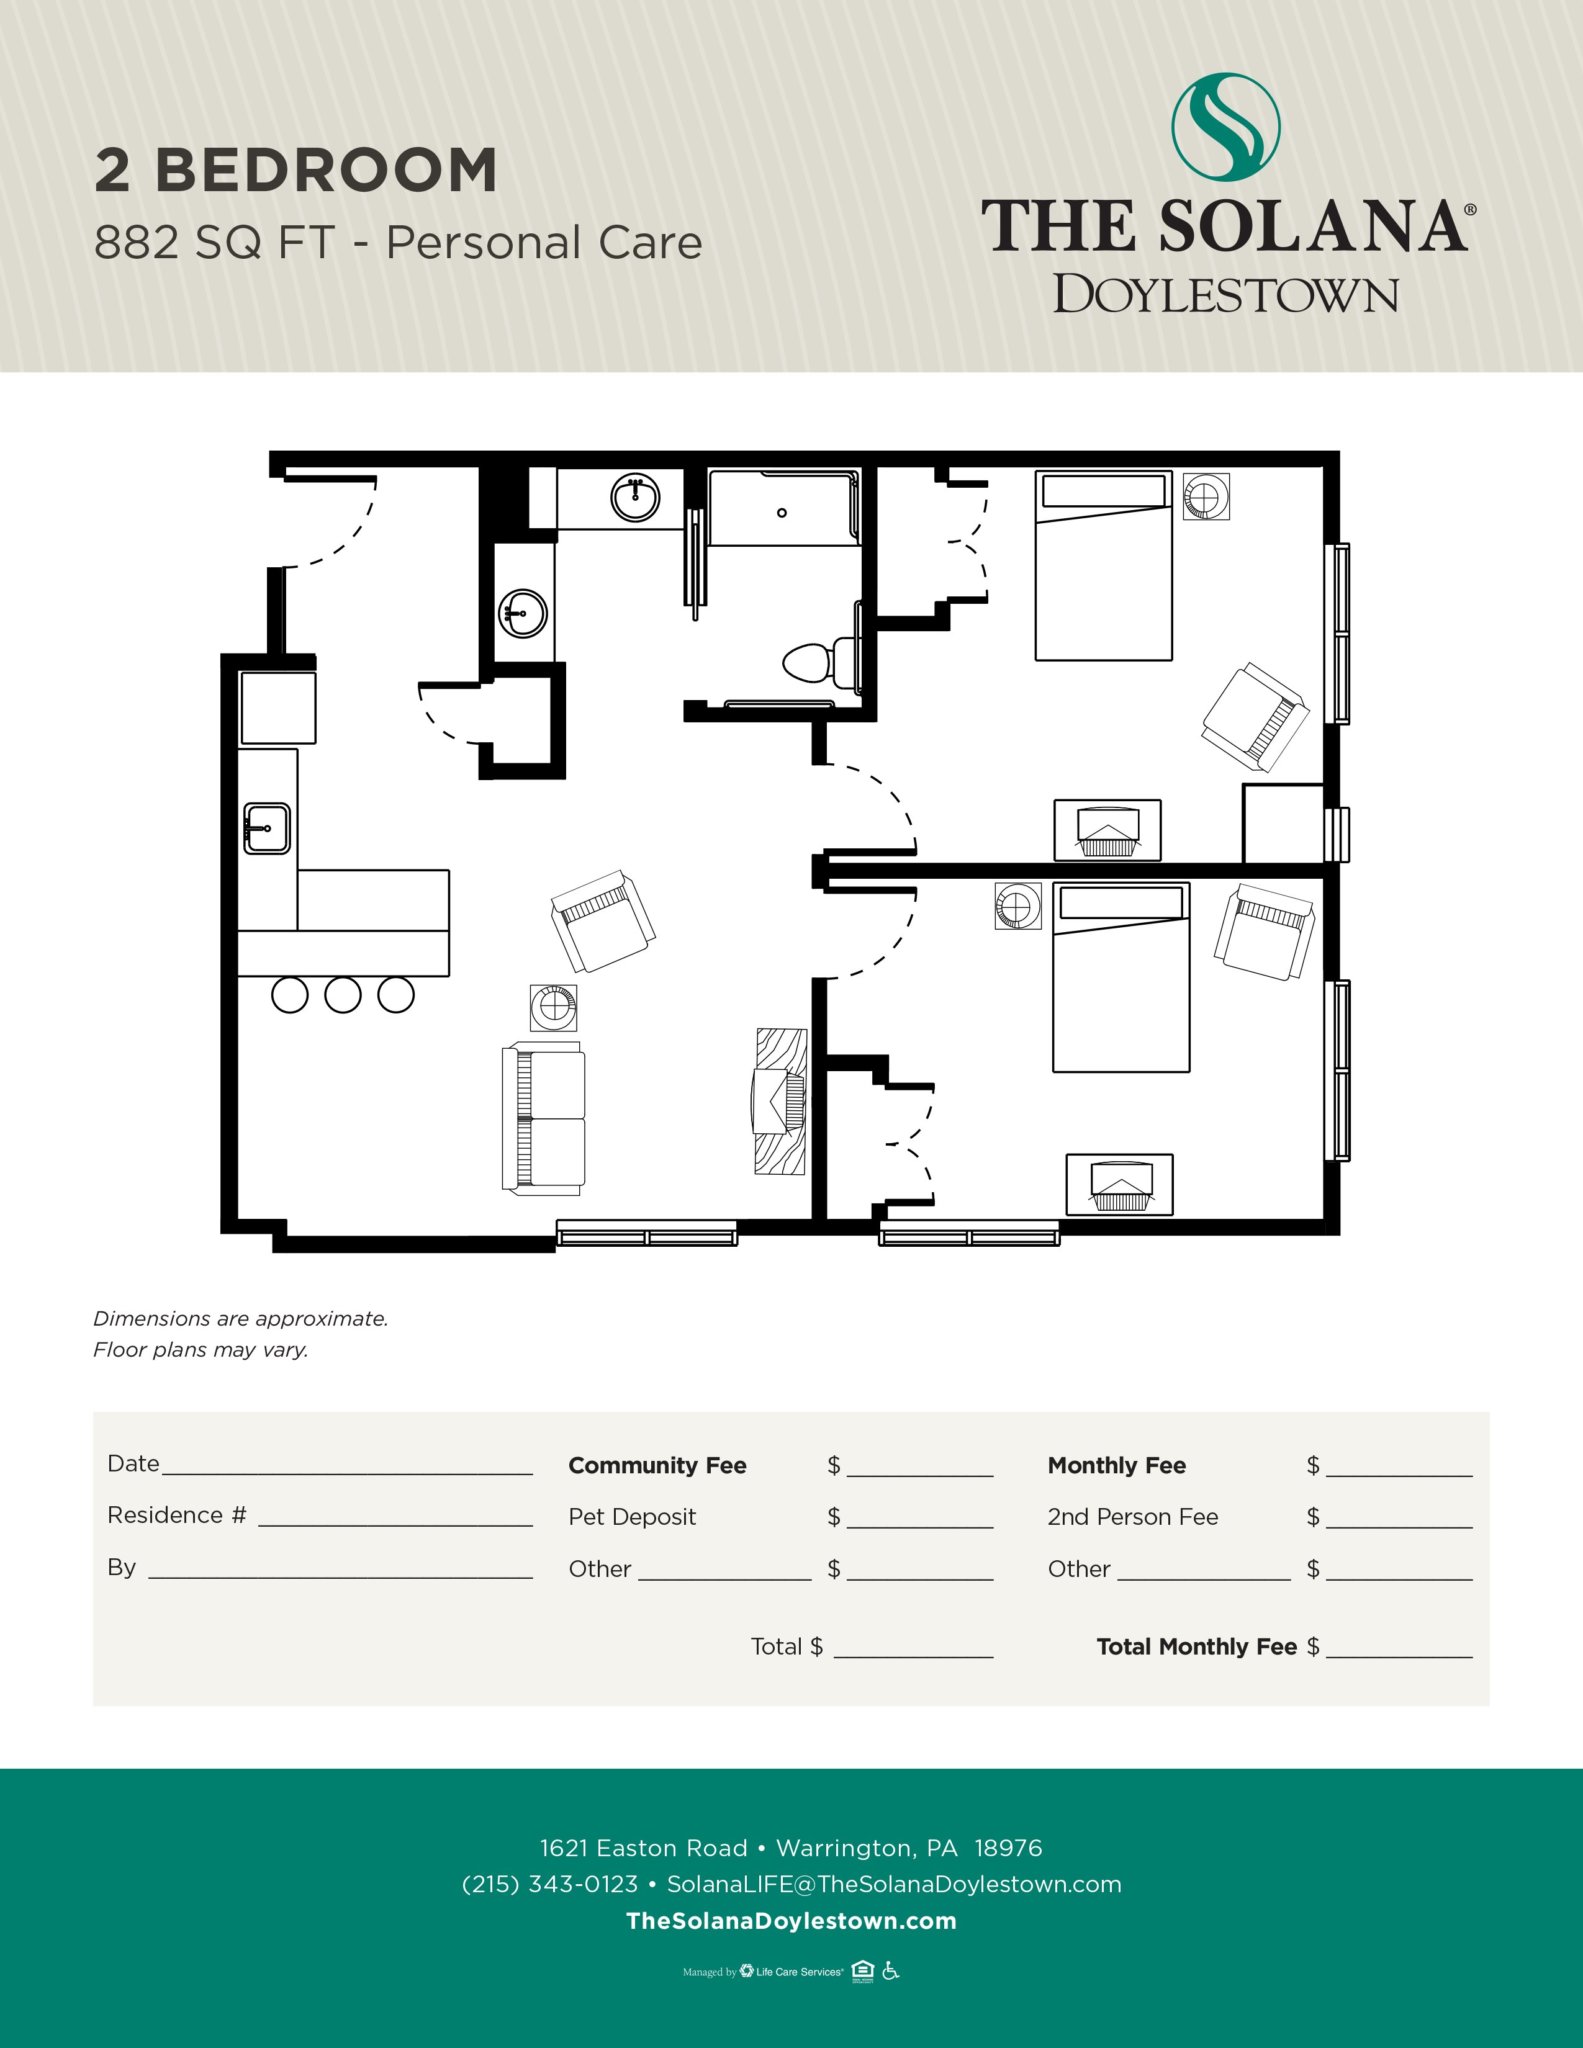 Detailed floor plan of a 2-bedroom 882 sq ft unit at The Solana Doylestown senior living community.